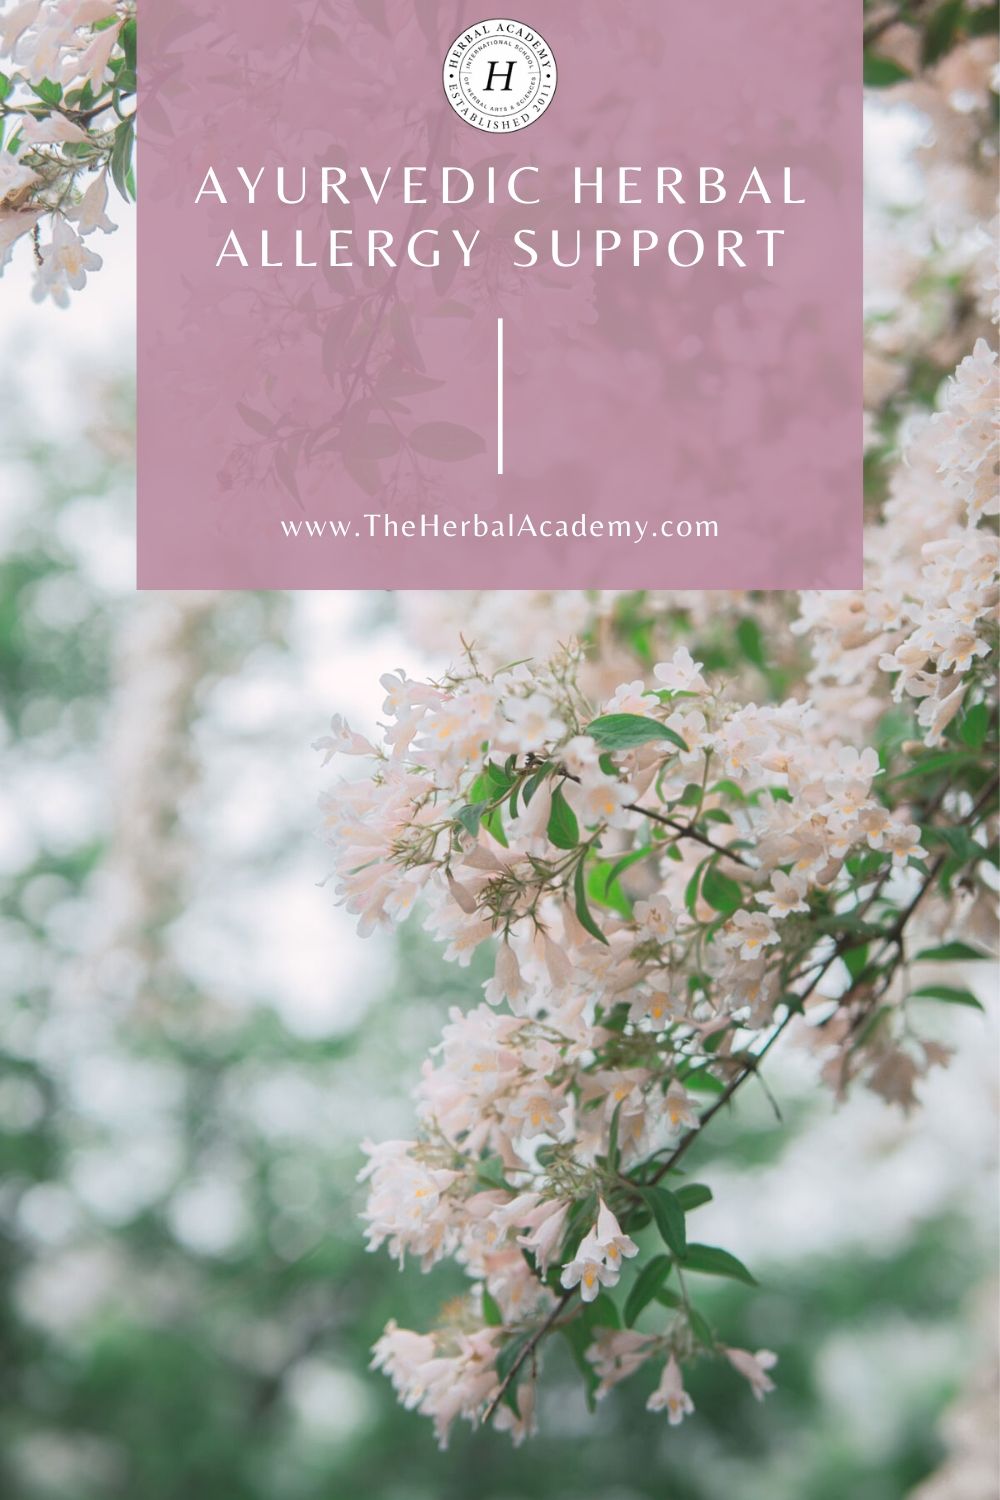 Herbal Allergy Support Using Ayurvedic Herbs | Herbal Academy | Allergies can manifest in many ways. Learn about ayurvedic herbal allergy support to take steps toward greater balance and optimum wellness. 